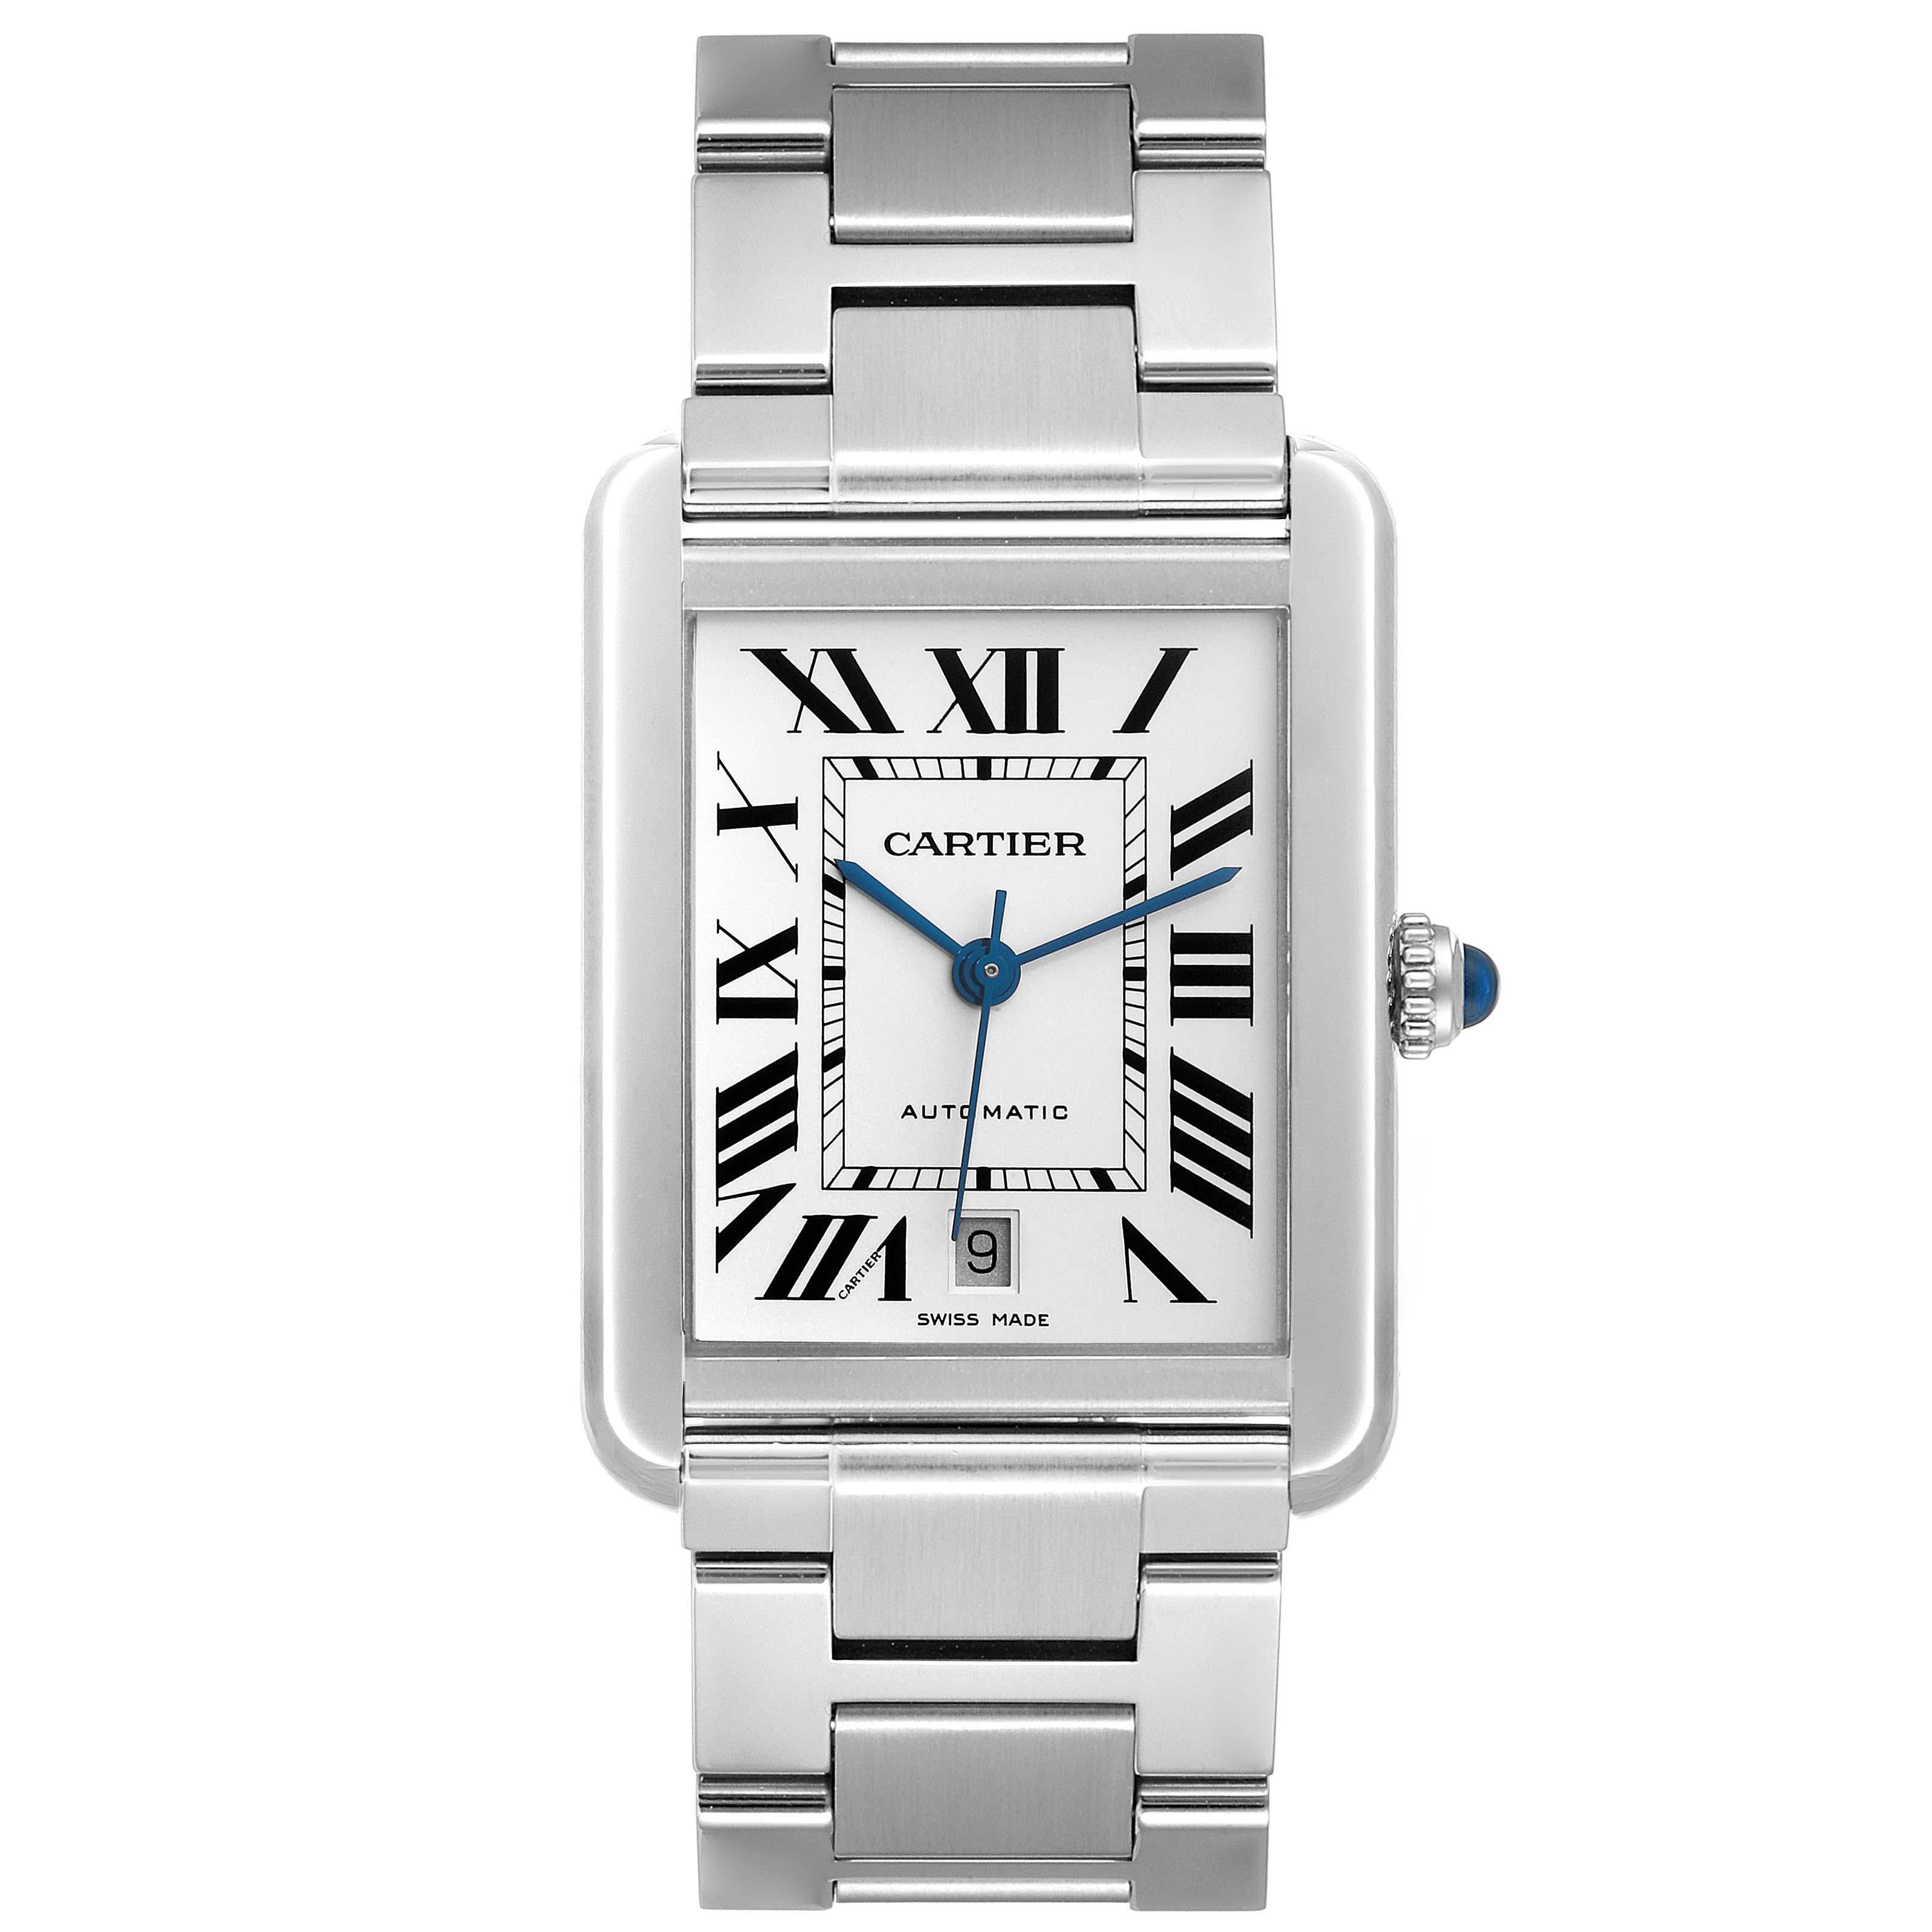 Cartier Tank Solo XL Silver Dial Automatic Steel Mens Watch W5200028 Card. Automatic self-winding movement. Stainless steel case 31.0 x 40.85 mm. Circular grained crown set with the blue spinel cabochon. . Scratch resistant sapphire crystal. Silver